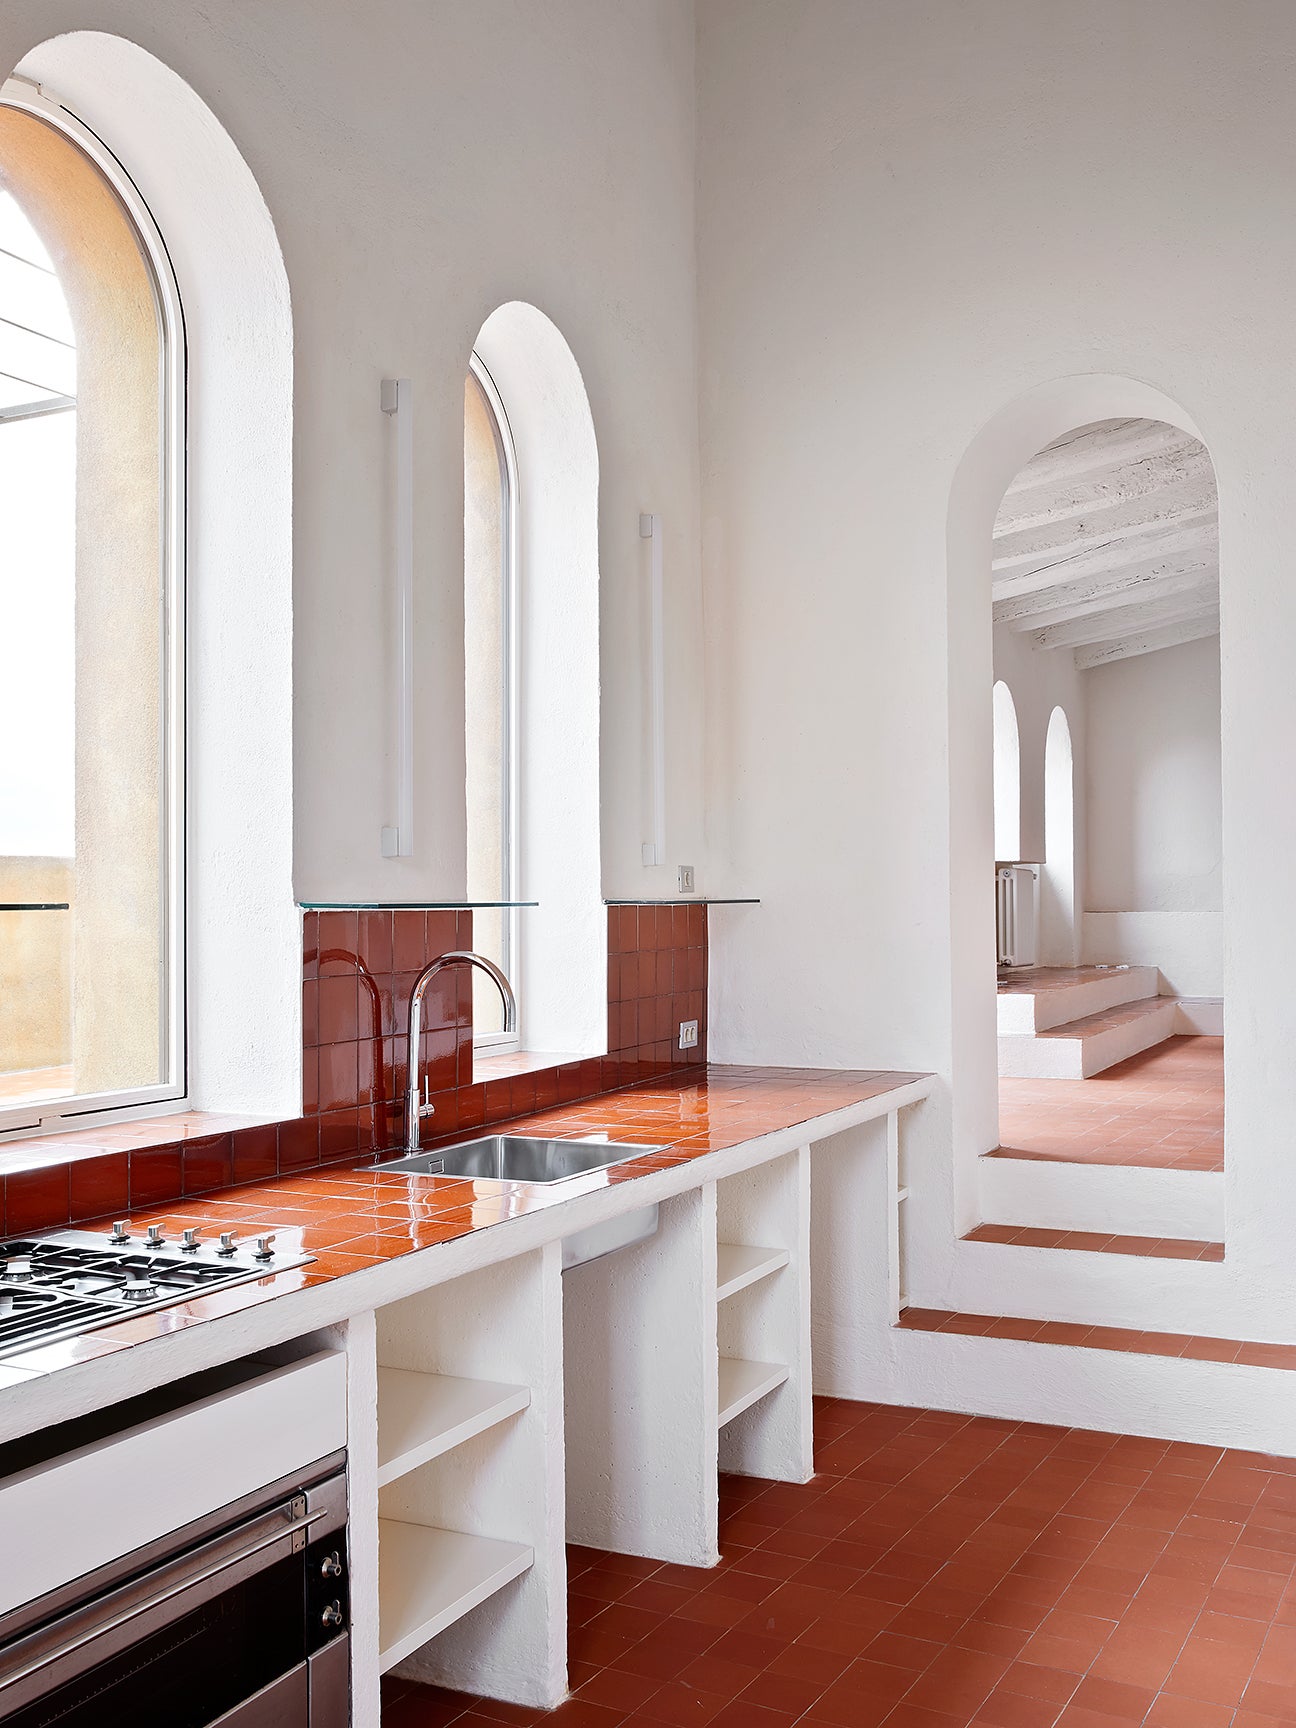 White kitchen with terra cotta floors and countertops